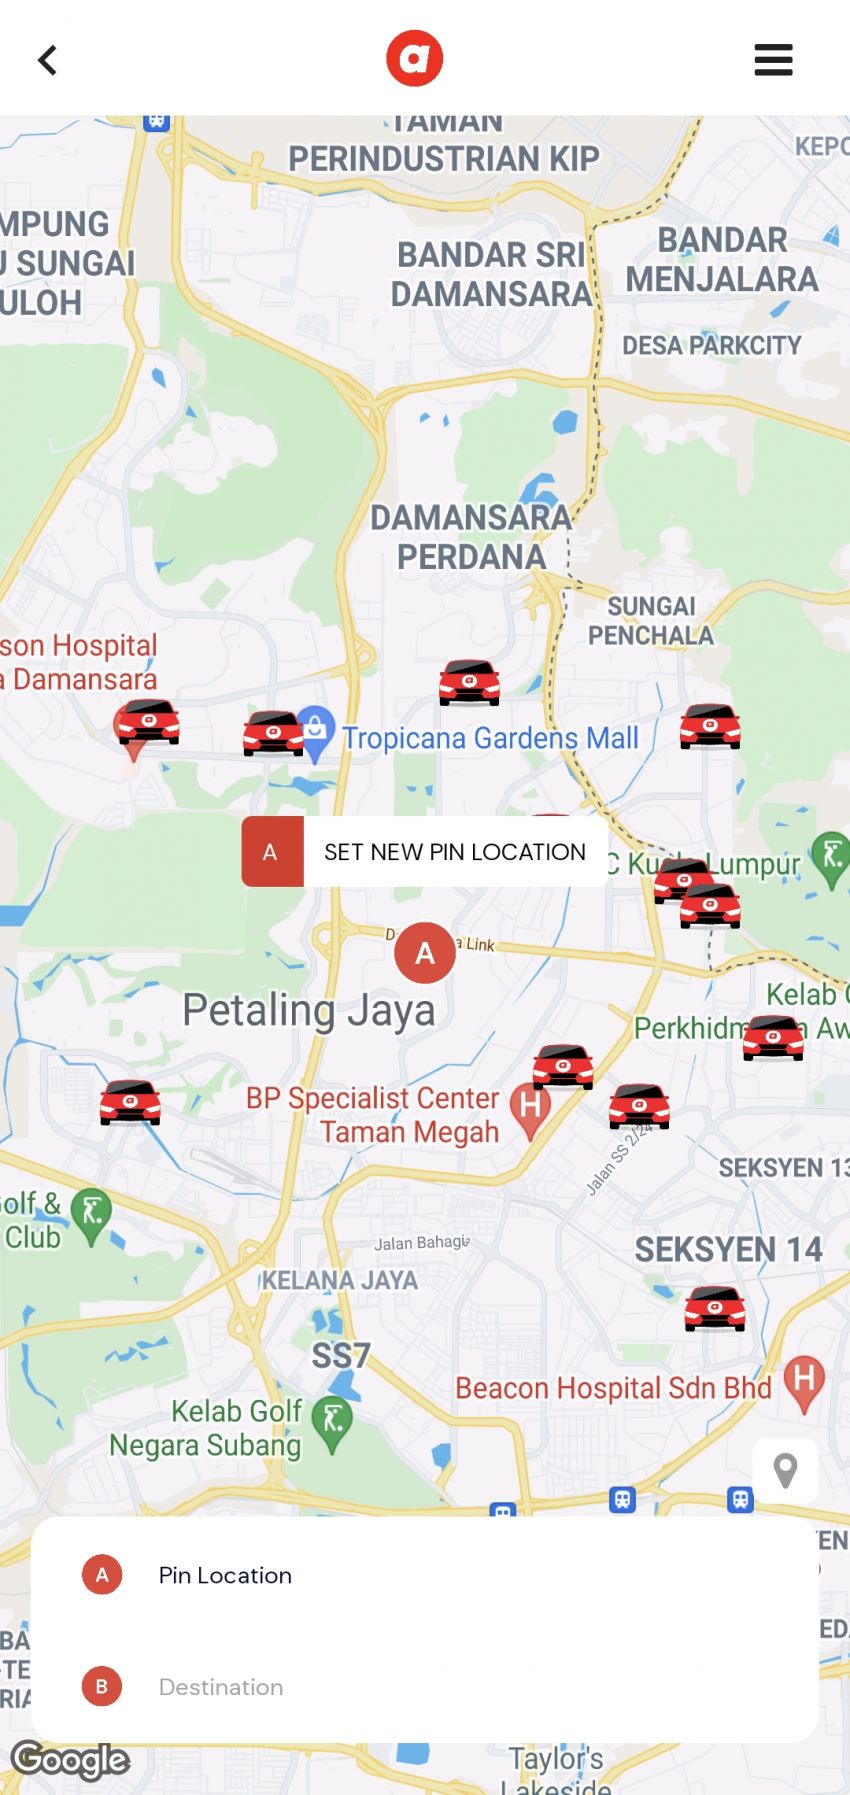 AirAsia Ride launched in Malaysia to fight Grab – new e-hailing service with greater convenience, benefits Image #1335372